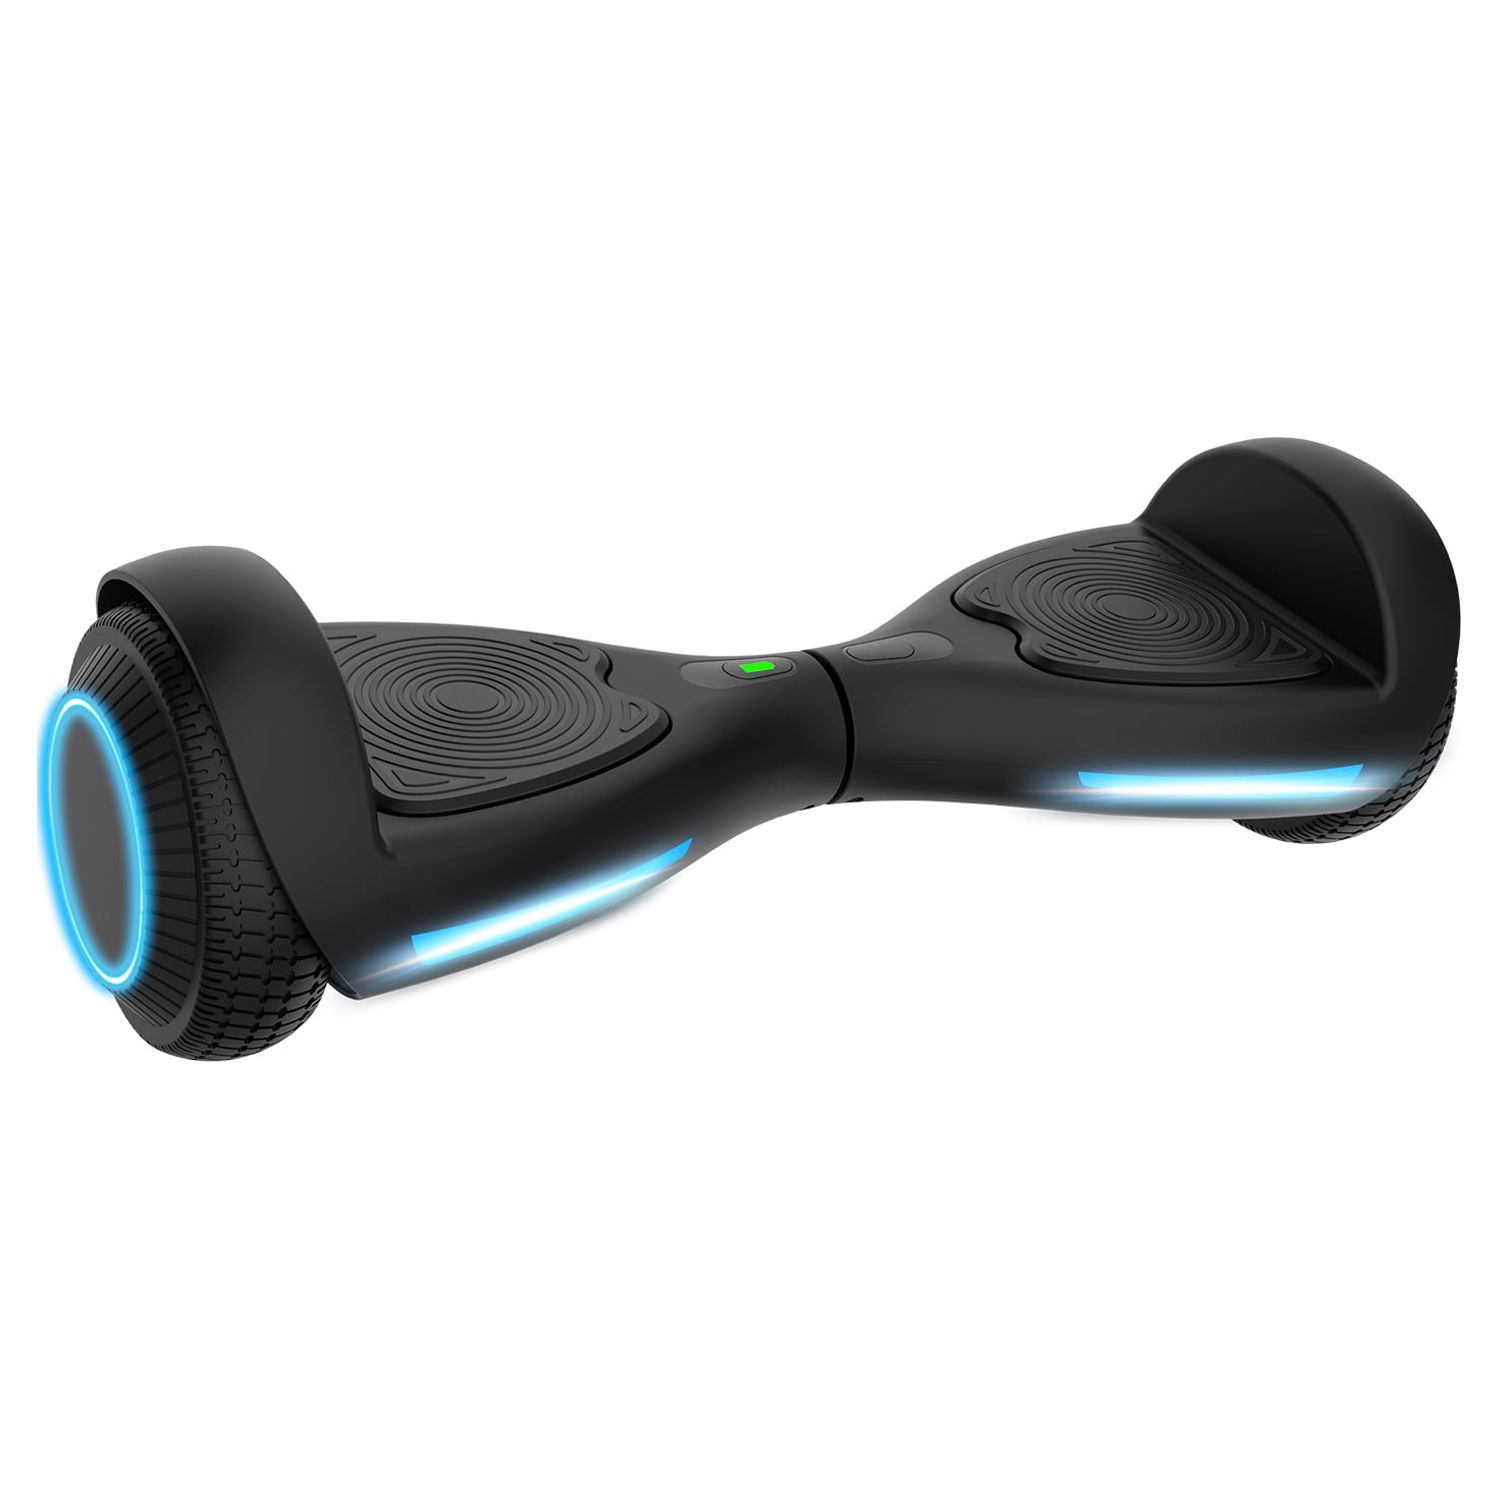 GOTRAX FX3 Hoverboard with 6.2 mph Max Speed, Self Balancing Scooter for 44-176lbs Kids Adults Black - image 1 of 9